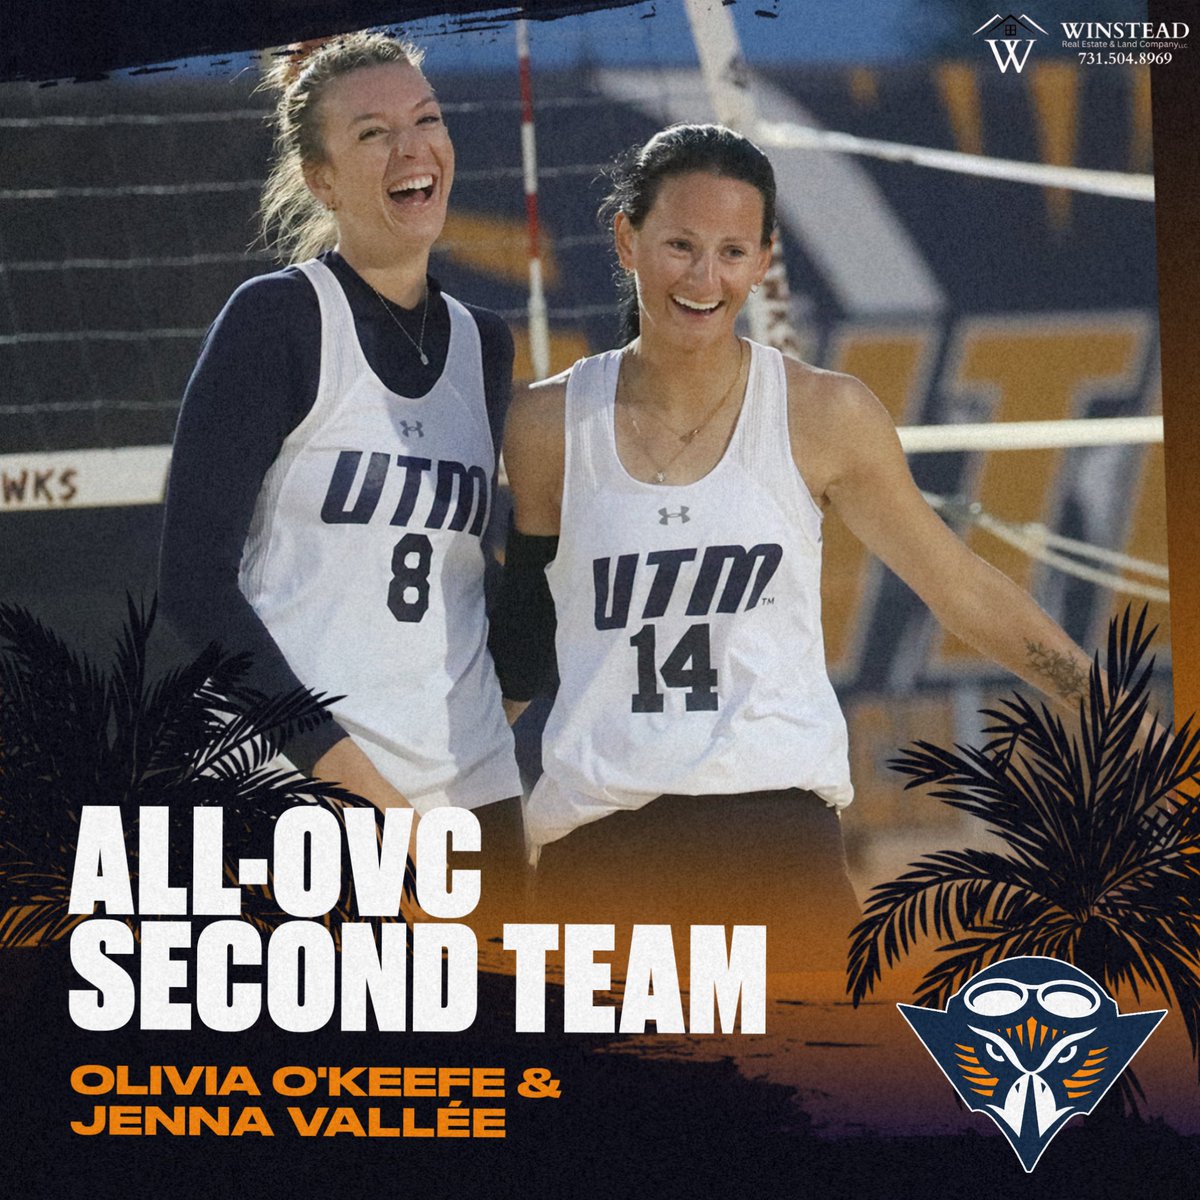 Congratulations to Skyhawk No. 1 pair Olivia O'Keefe and Jenna Vallée, who were named to the All-Ohio Valley Conference second team this evening!  

🏐 11-15 overall record
🏐 6-3 OVC record  

#MartinMade | #OVCit